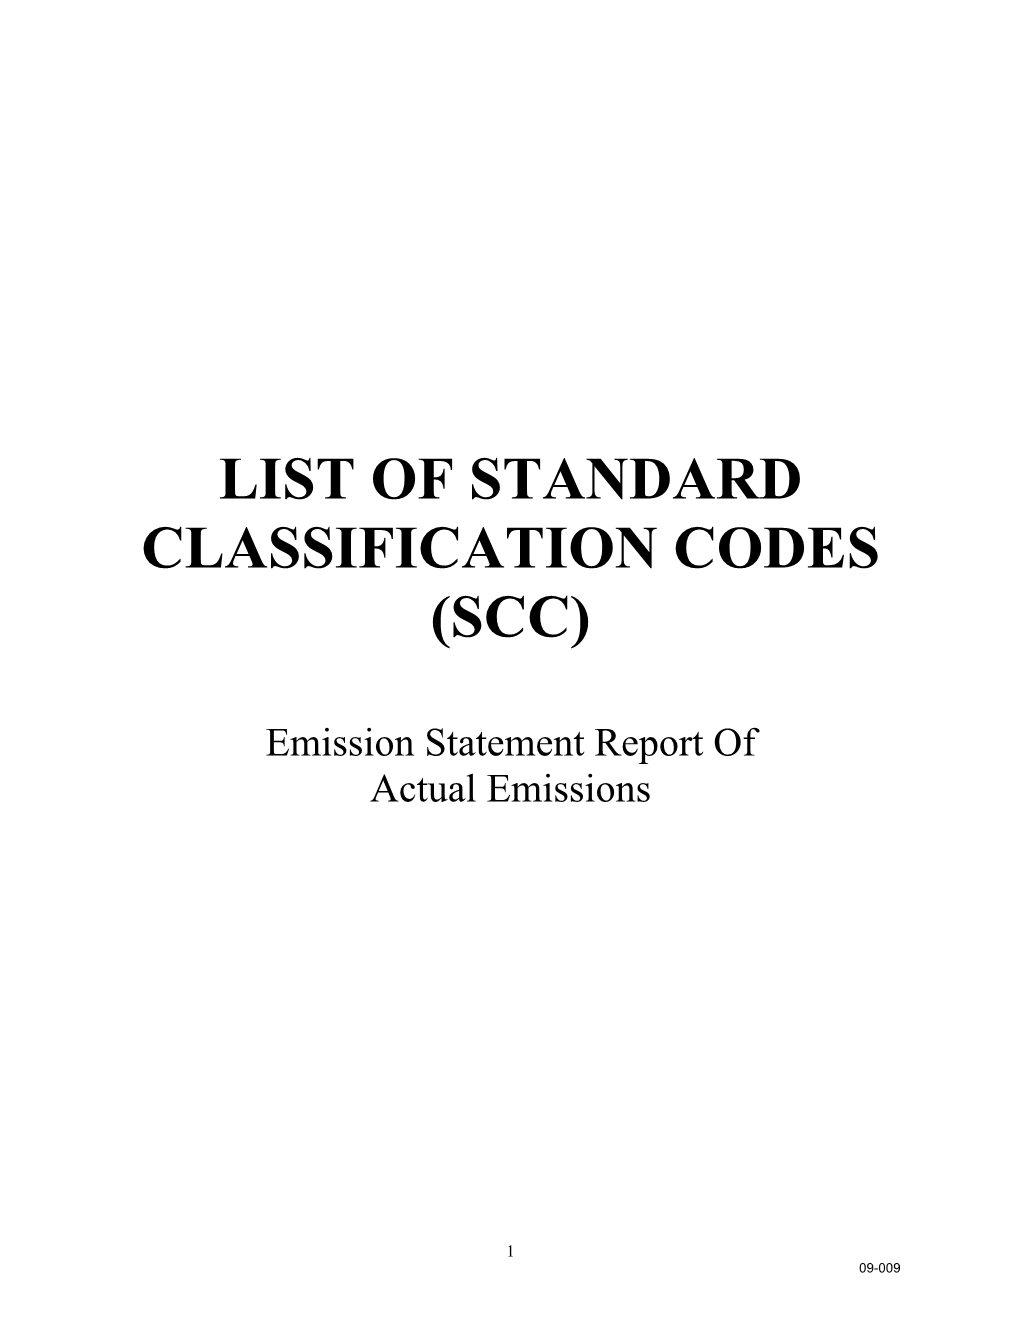 List of Standard Classification Codes (Scc)